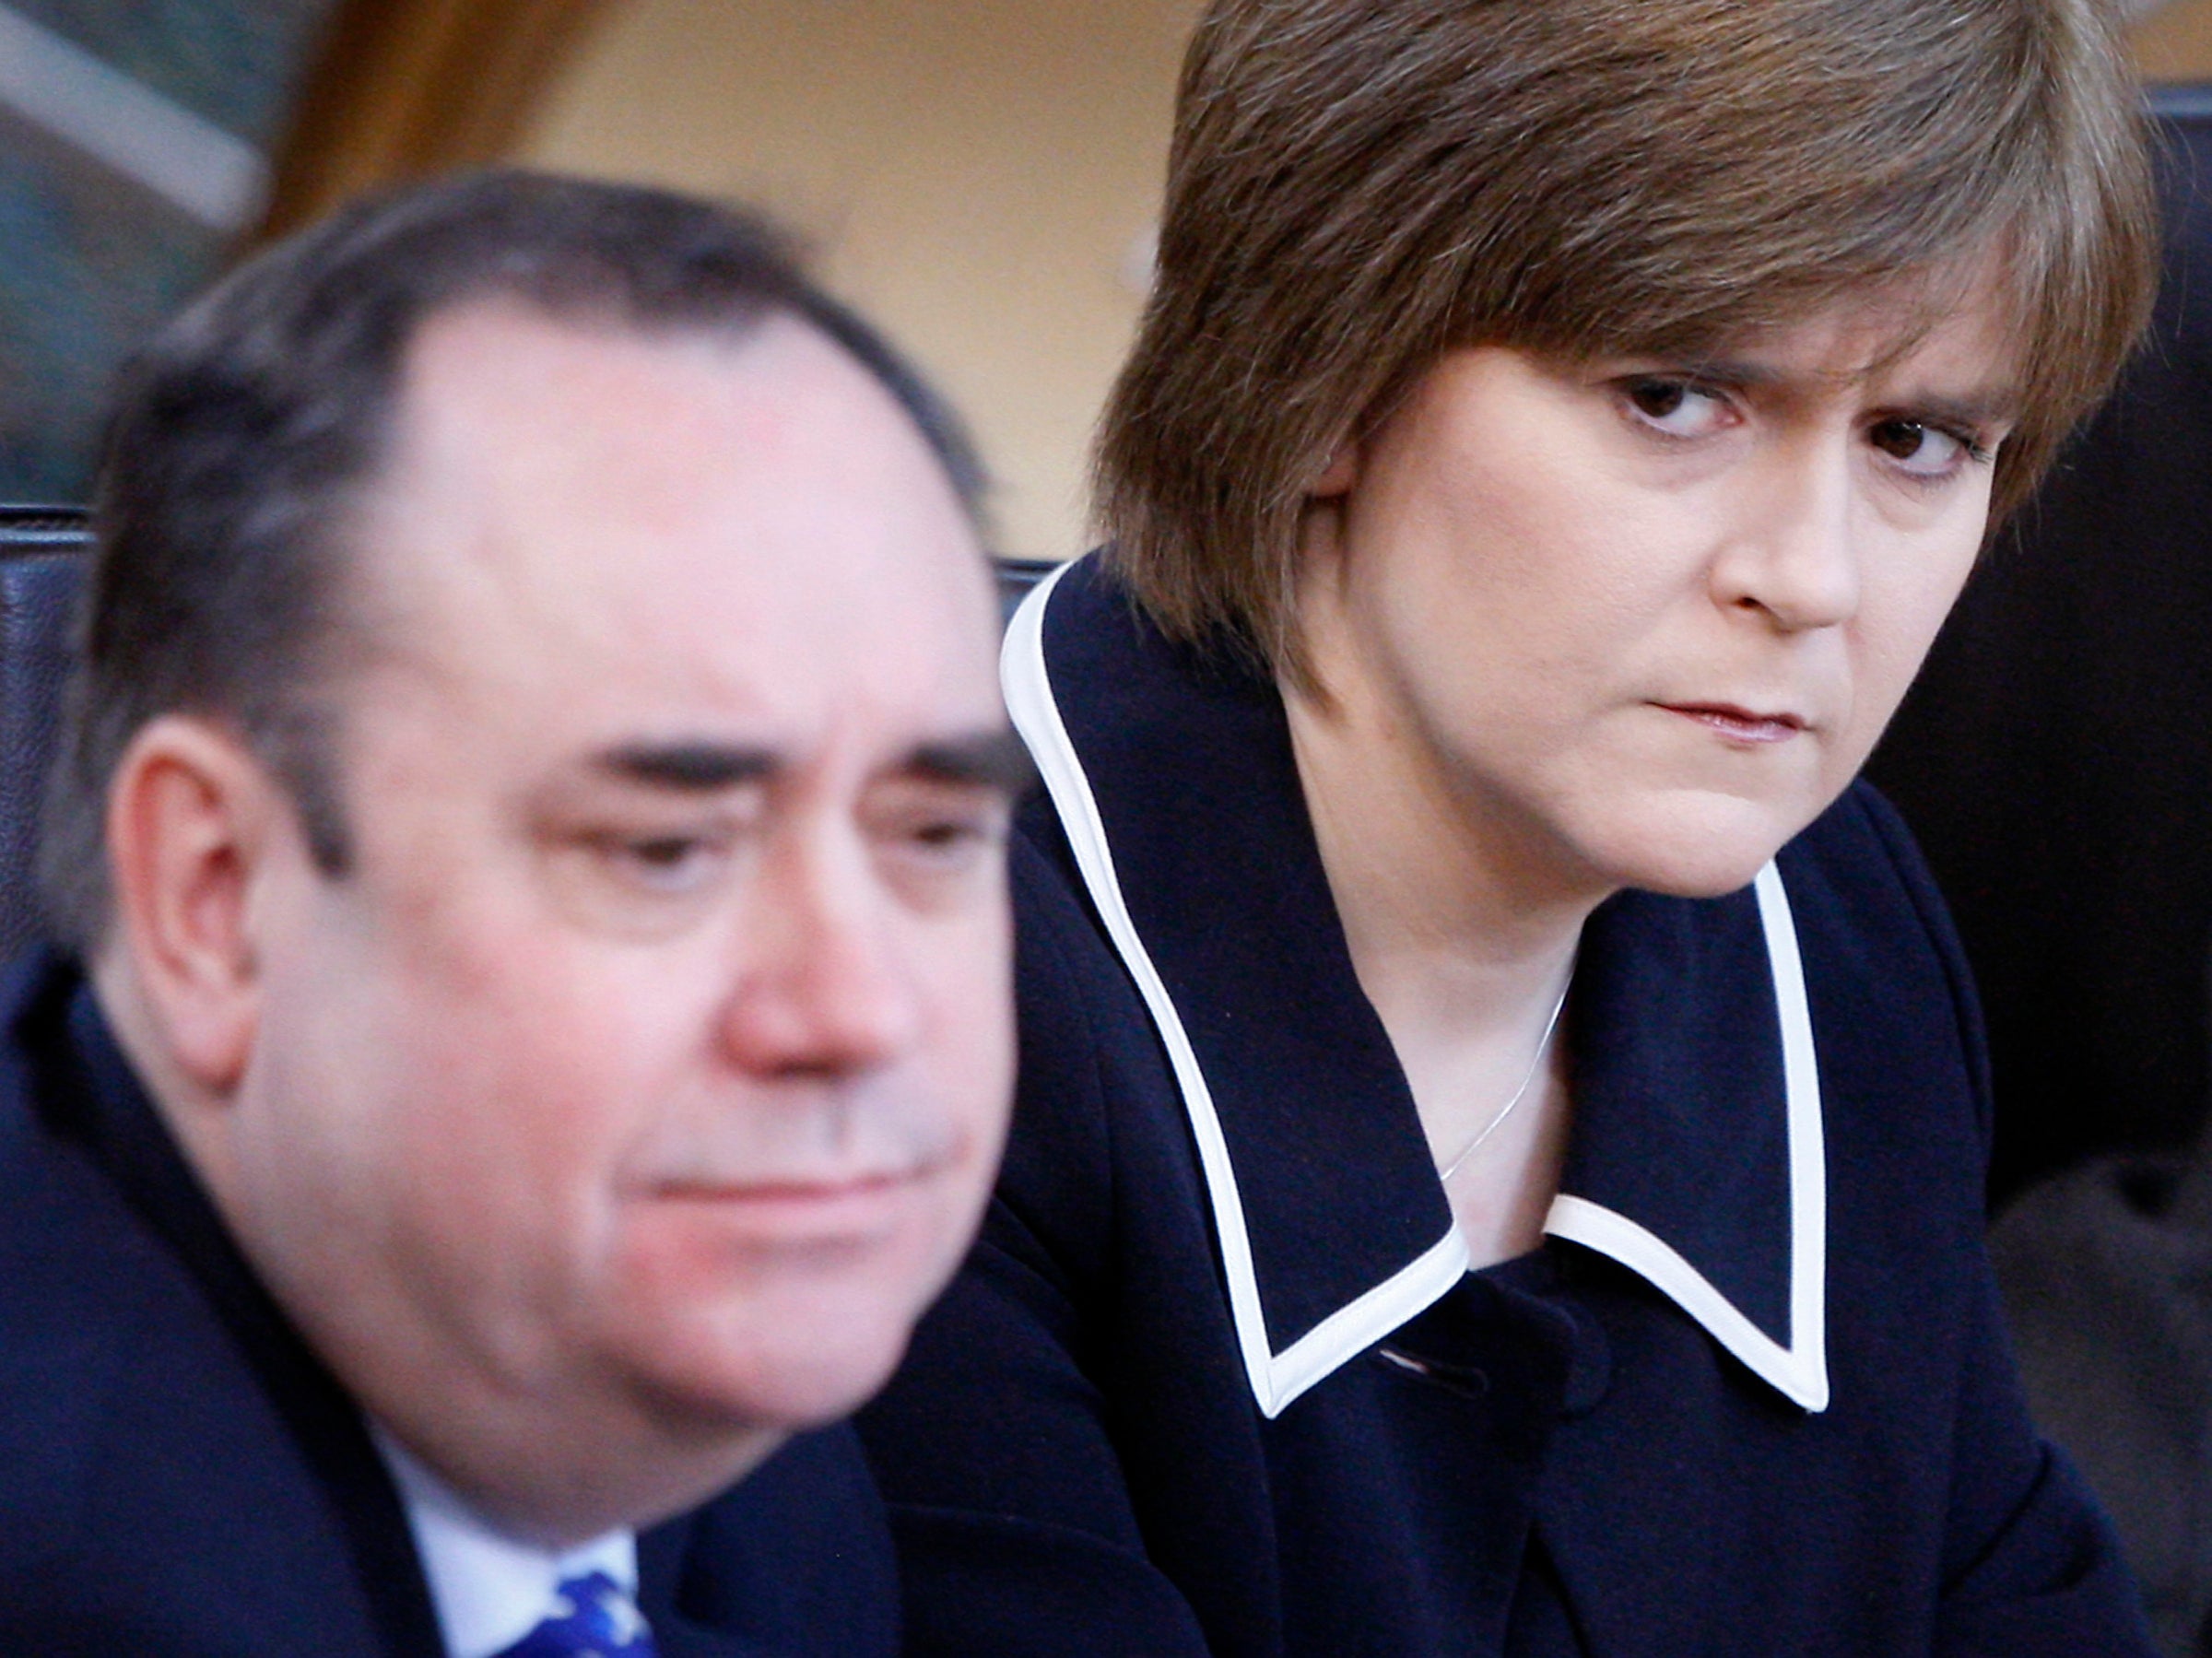 Pictured in 2010, the then first minister Alex Salmond and his deputy Nicola Sturgeon at the Scottish parliament in Edinburgh